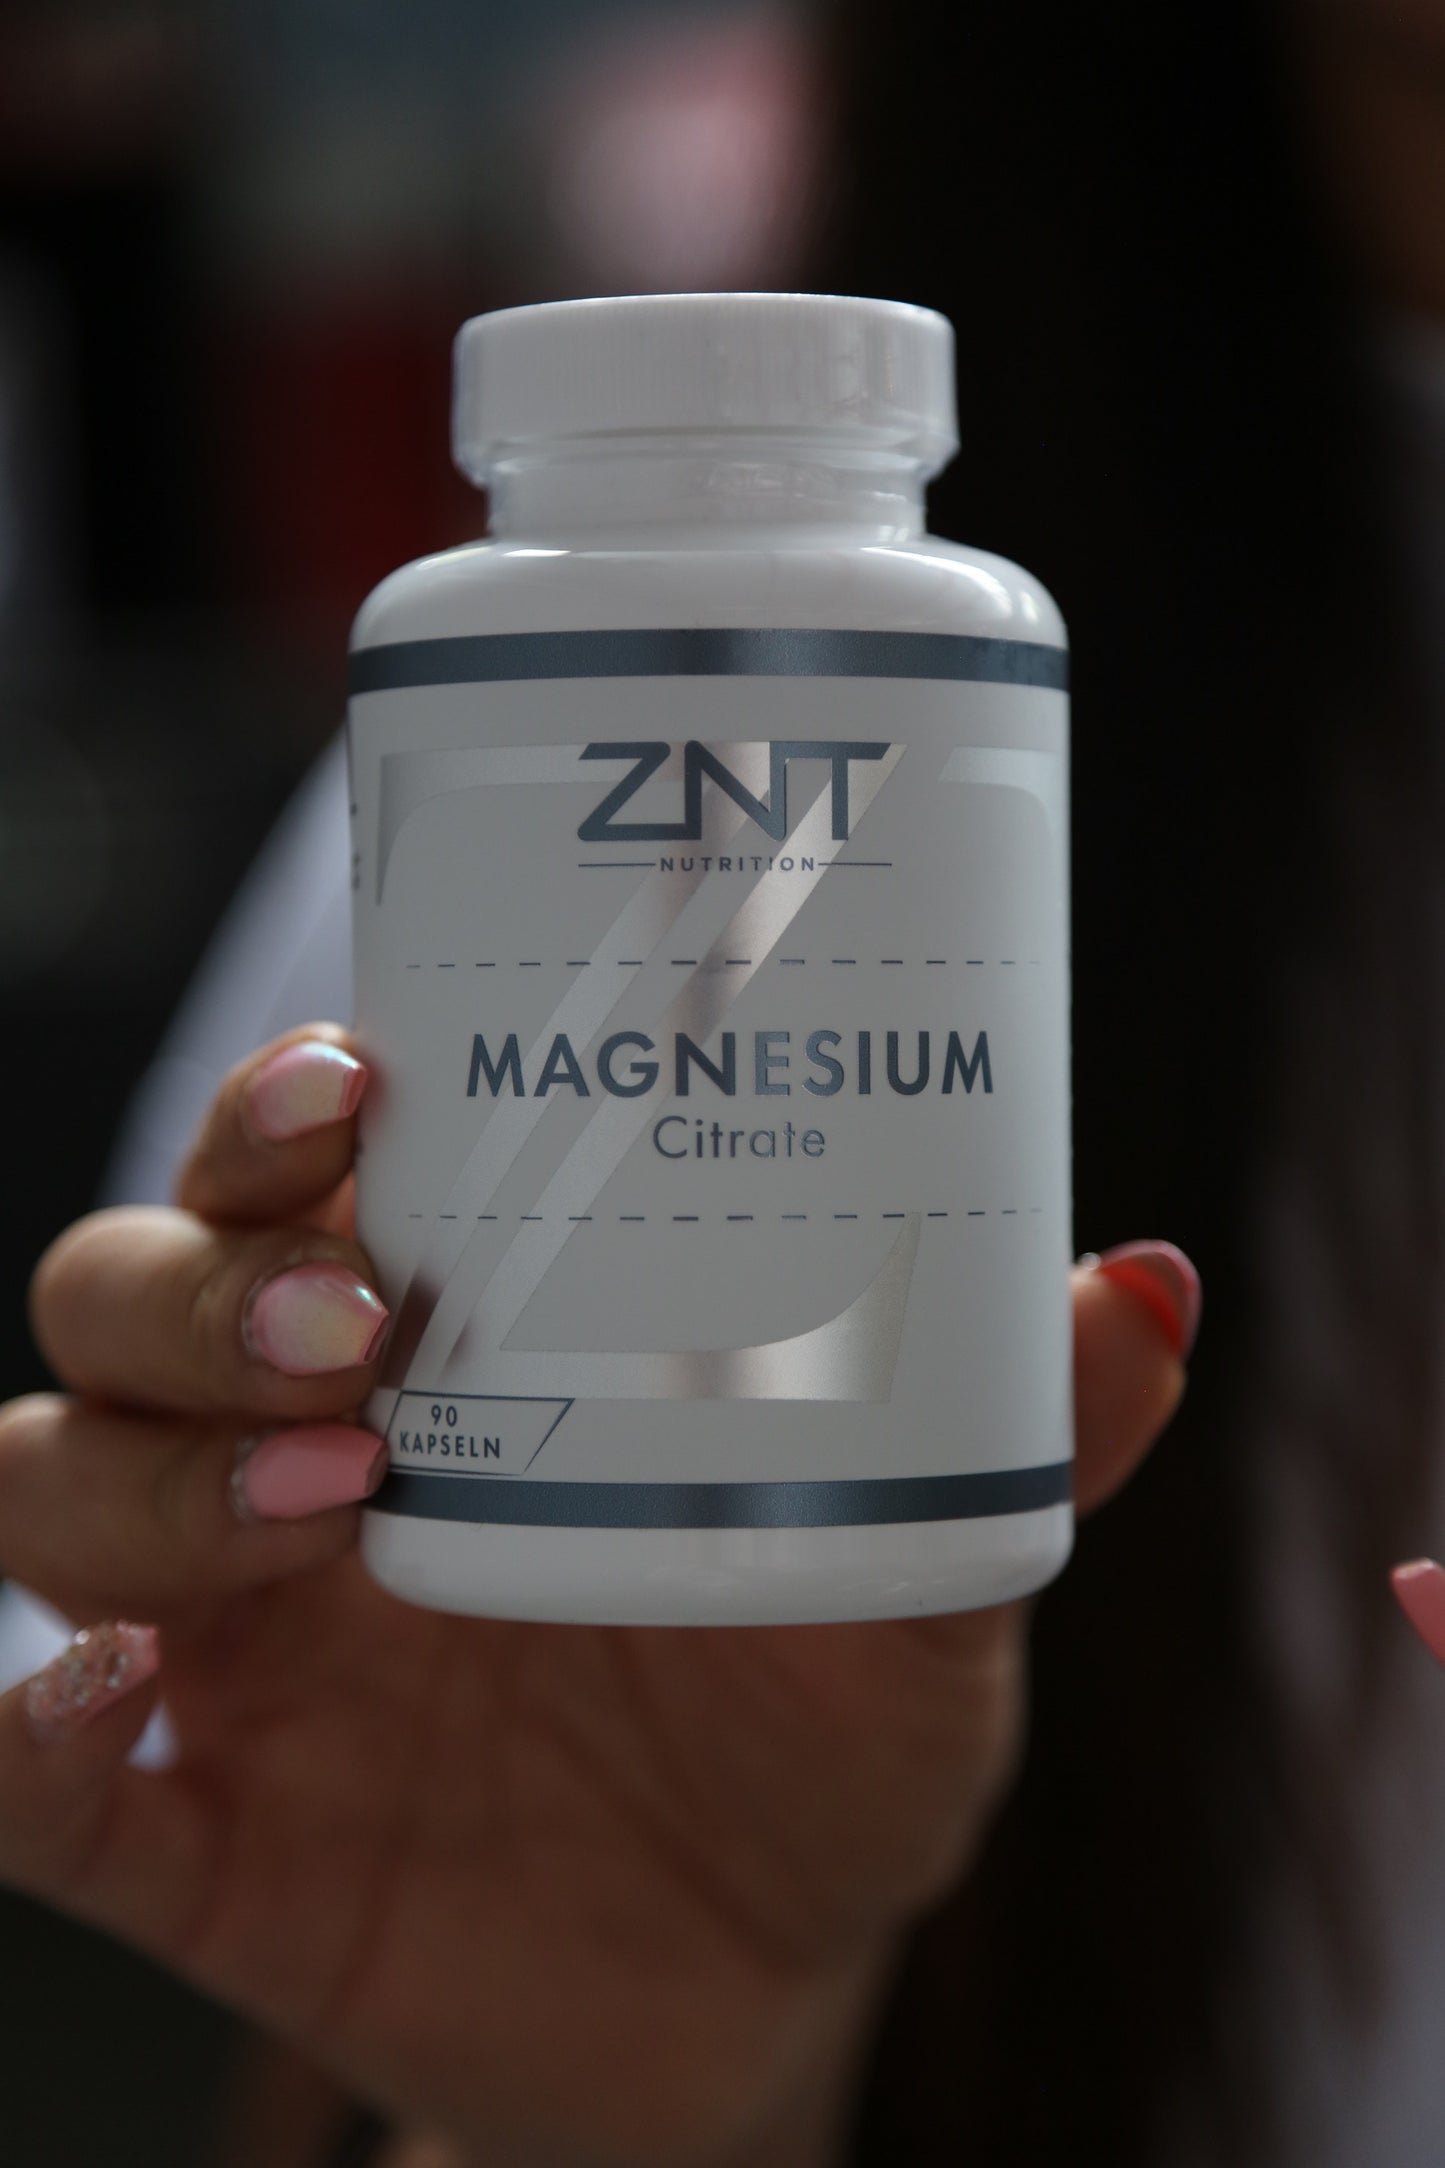 MAGNESIUM CITRATE - 90 KAPSELN - ZNT NUTRITION